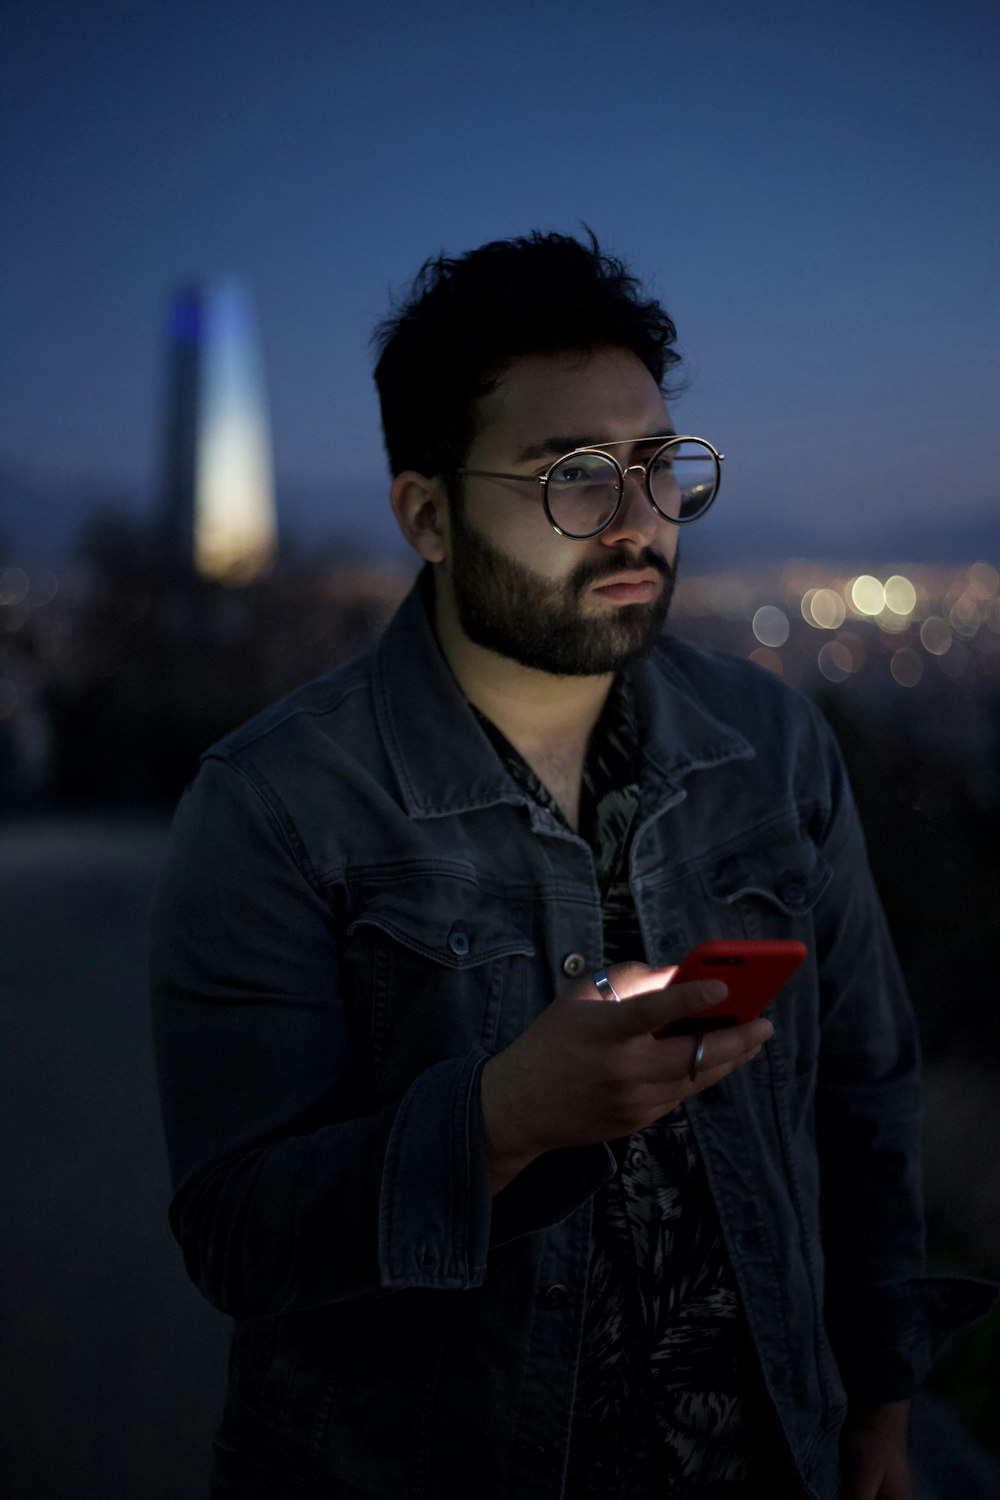 man in black leather jacket holding red smartphone during night time